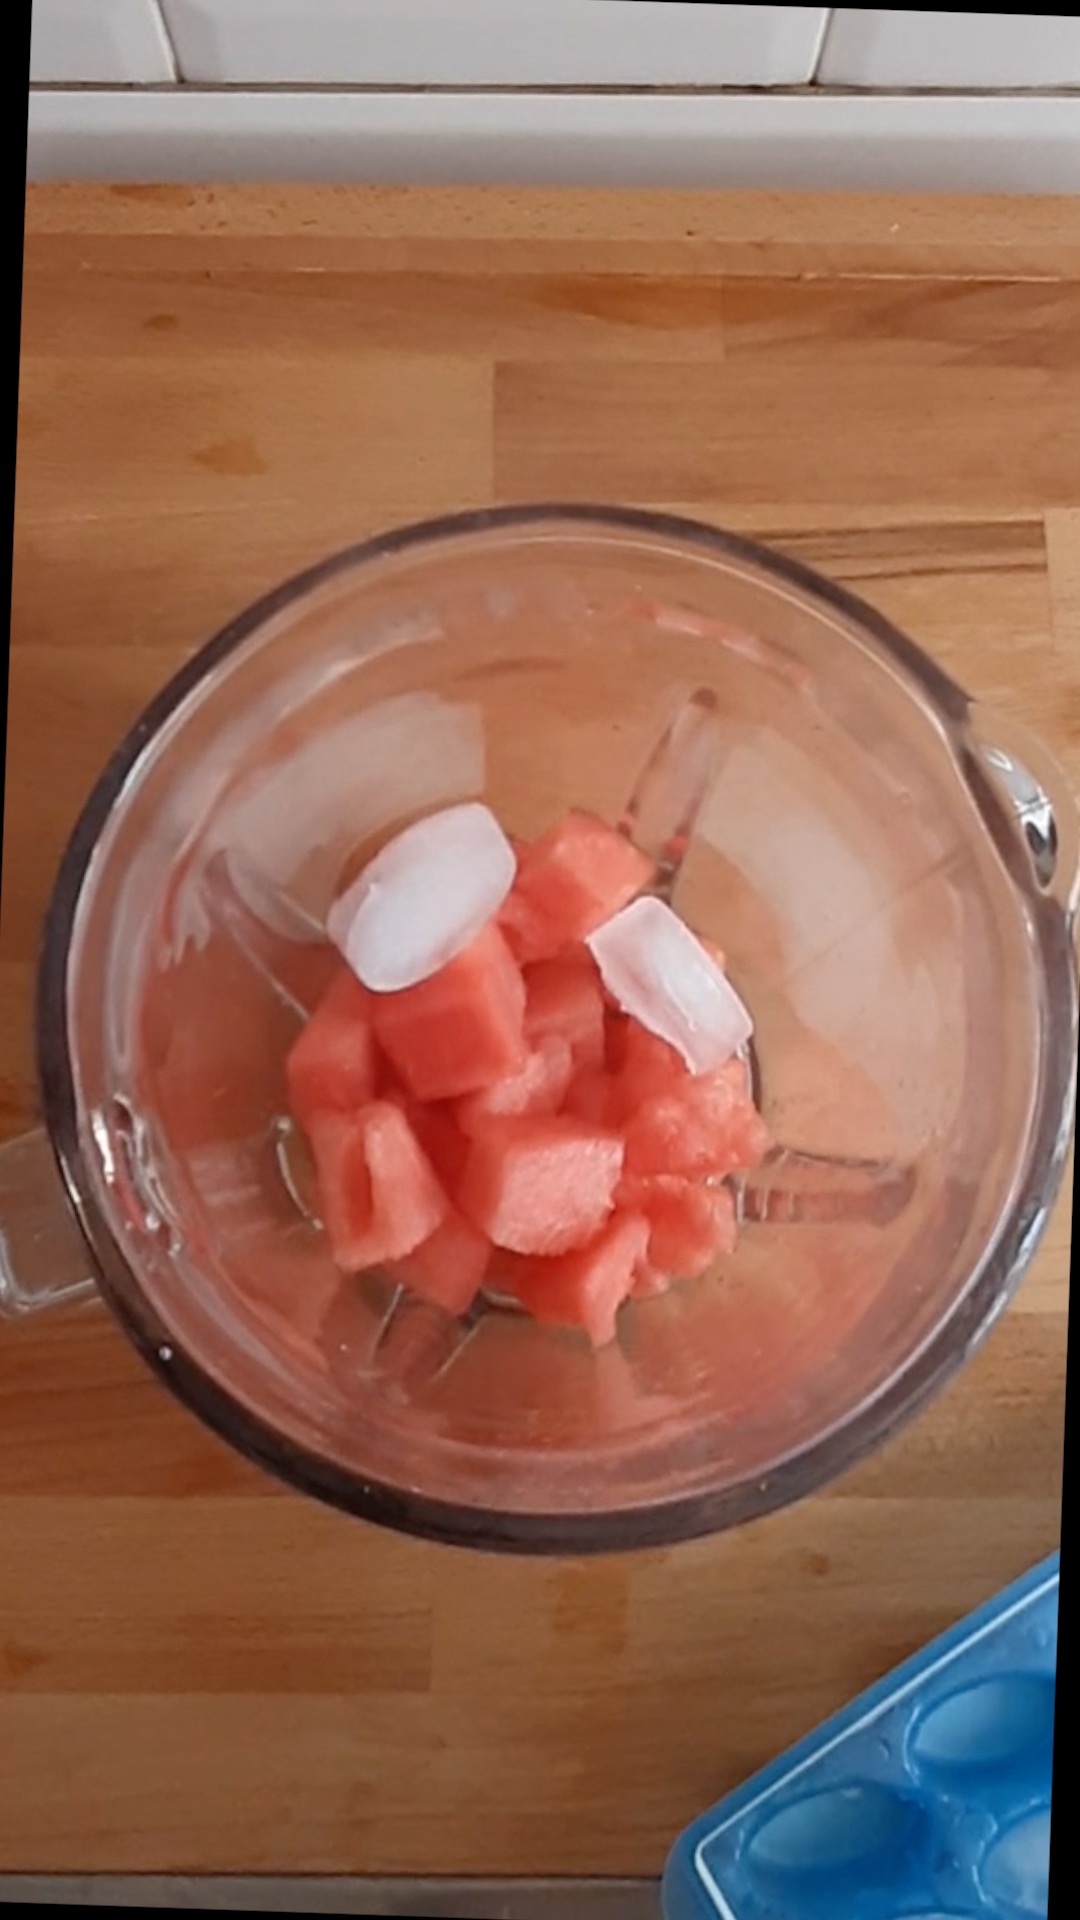 add all ingredients in the blender for watermelon margarita